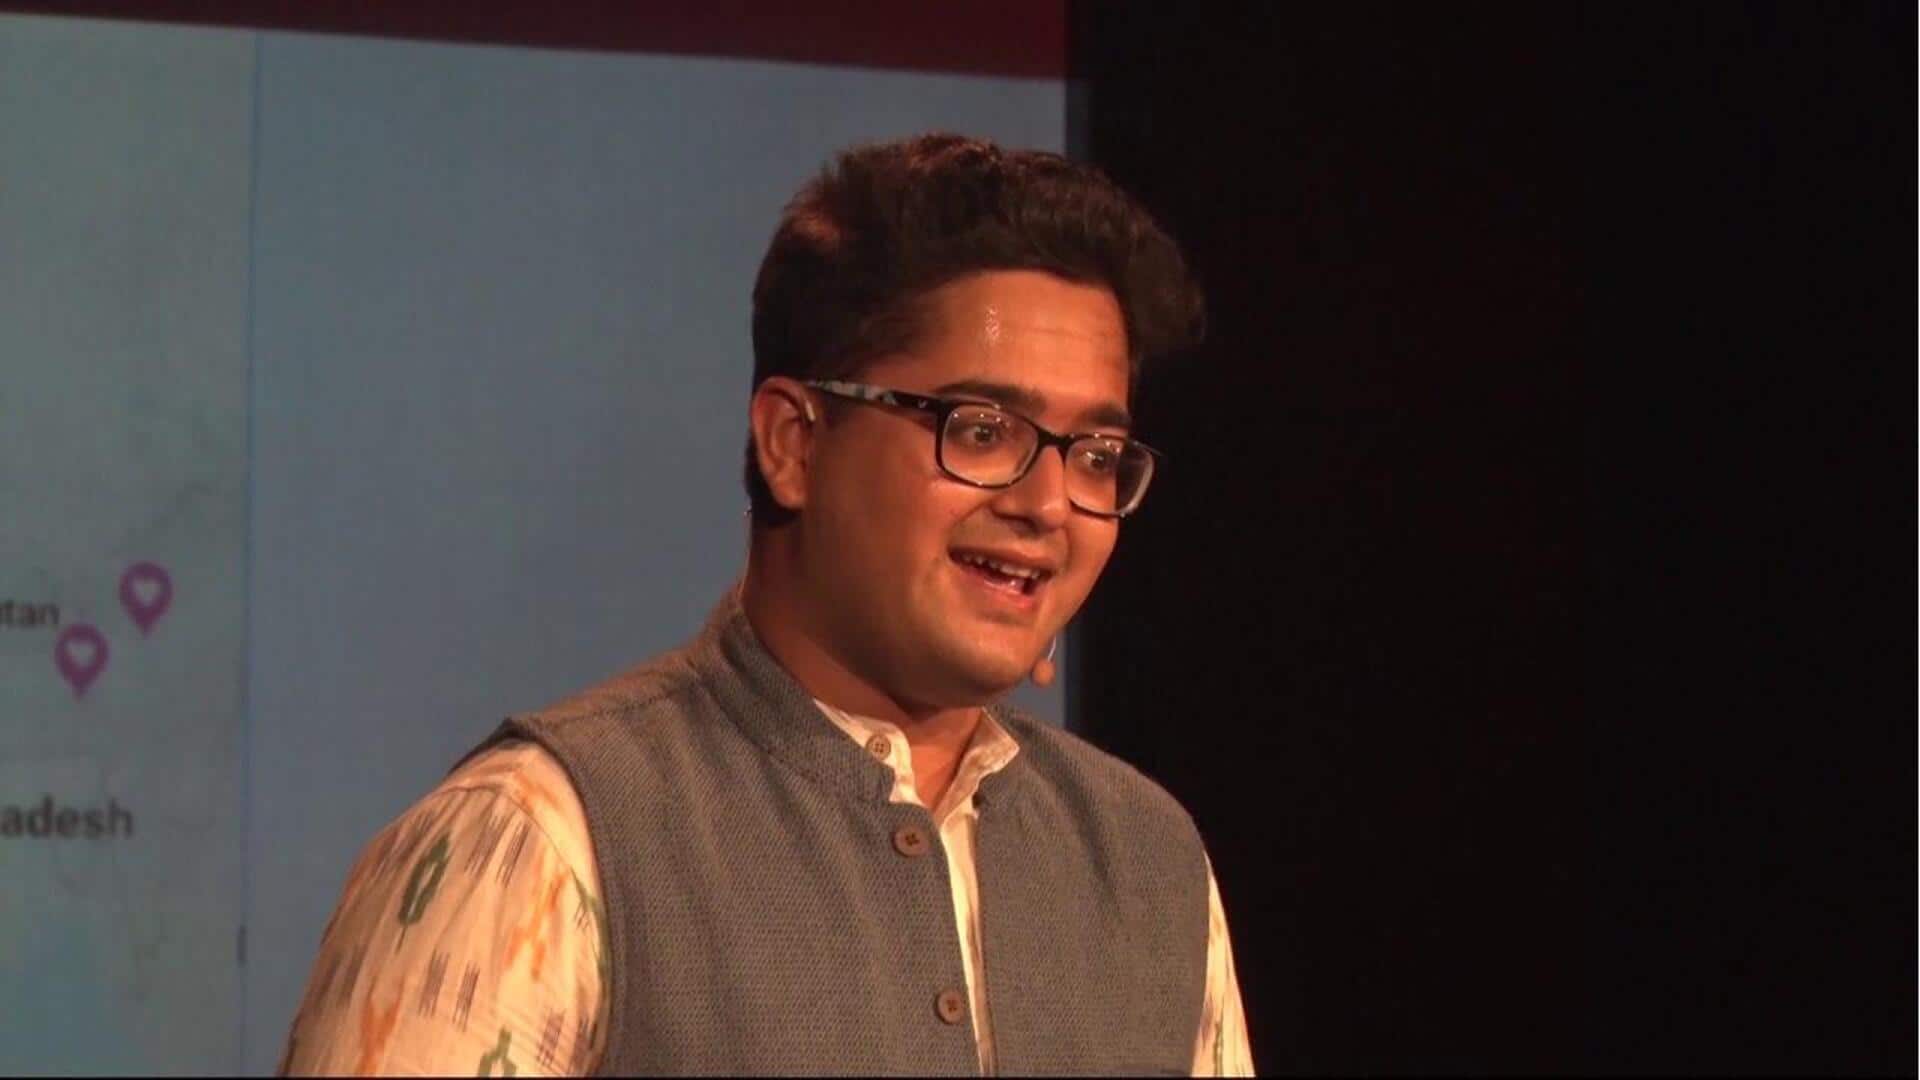 27-year-old entrepreneur is helping Google, Microsoft democratize AI in India